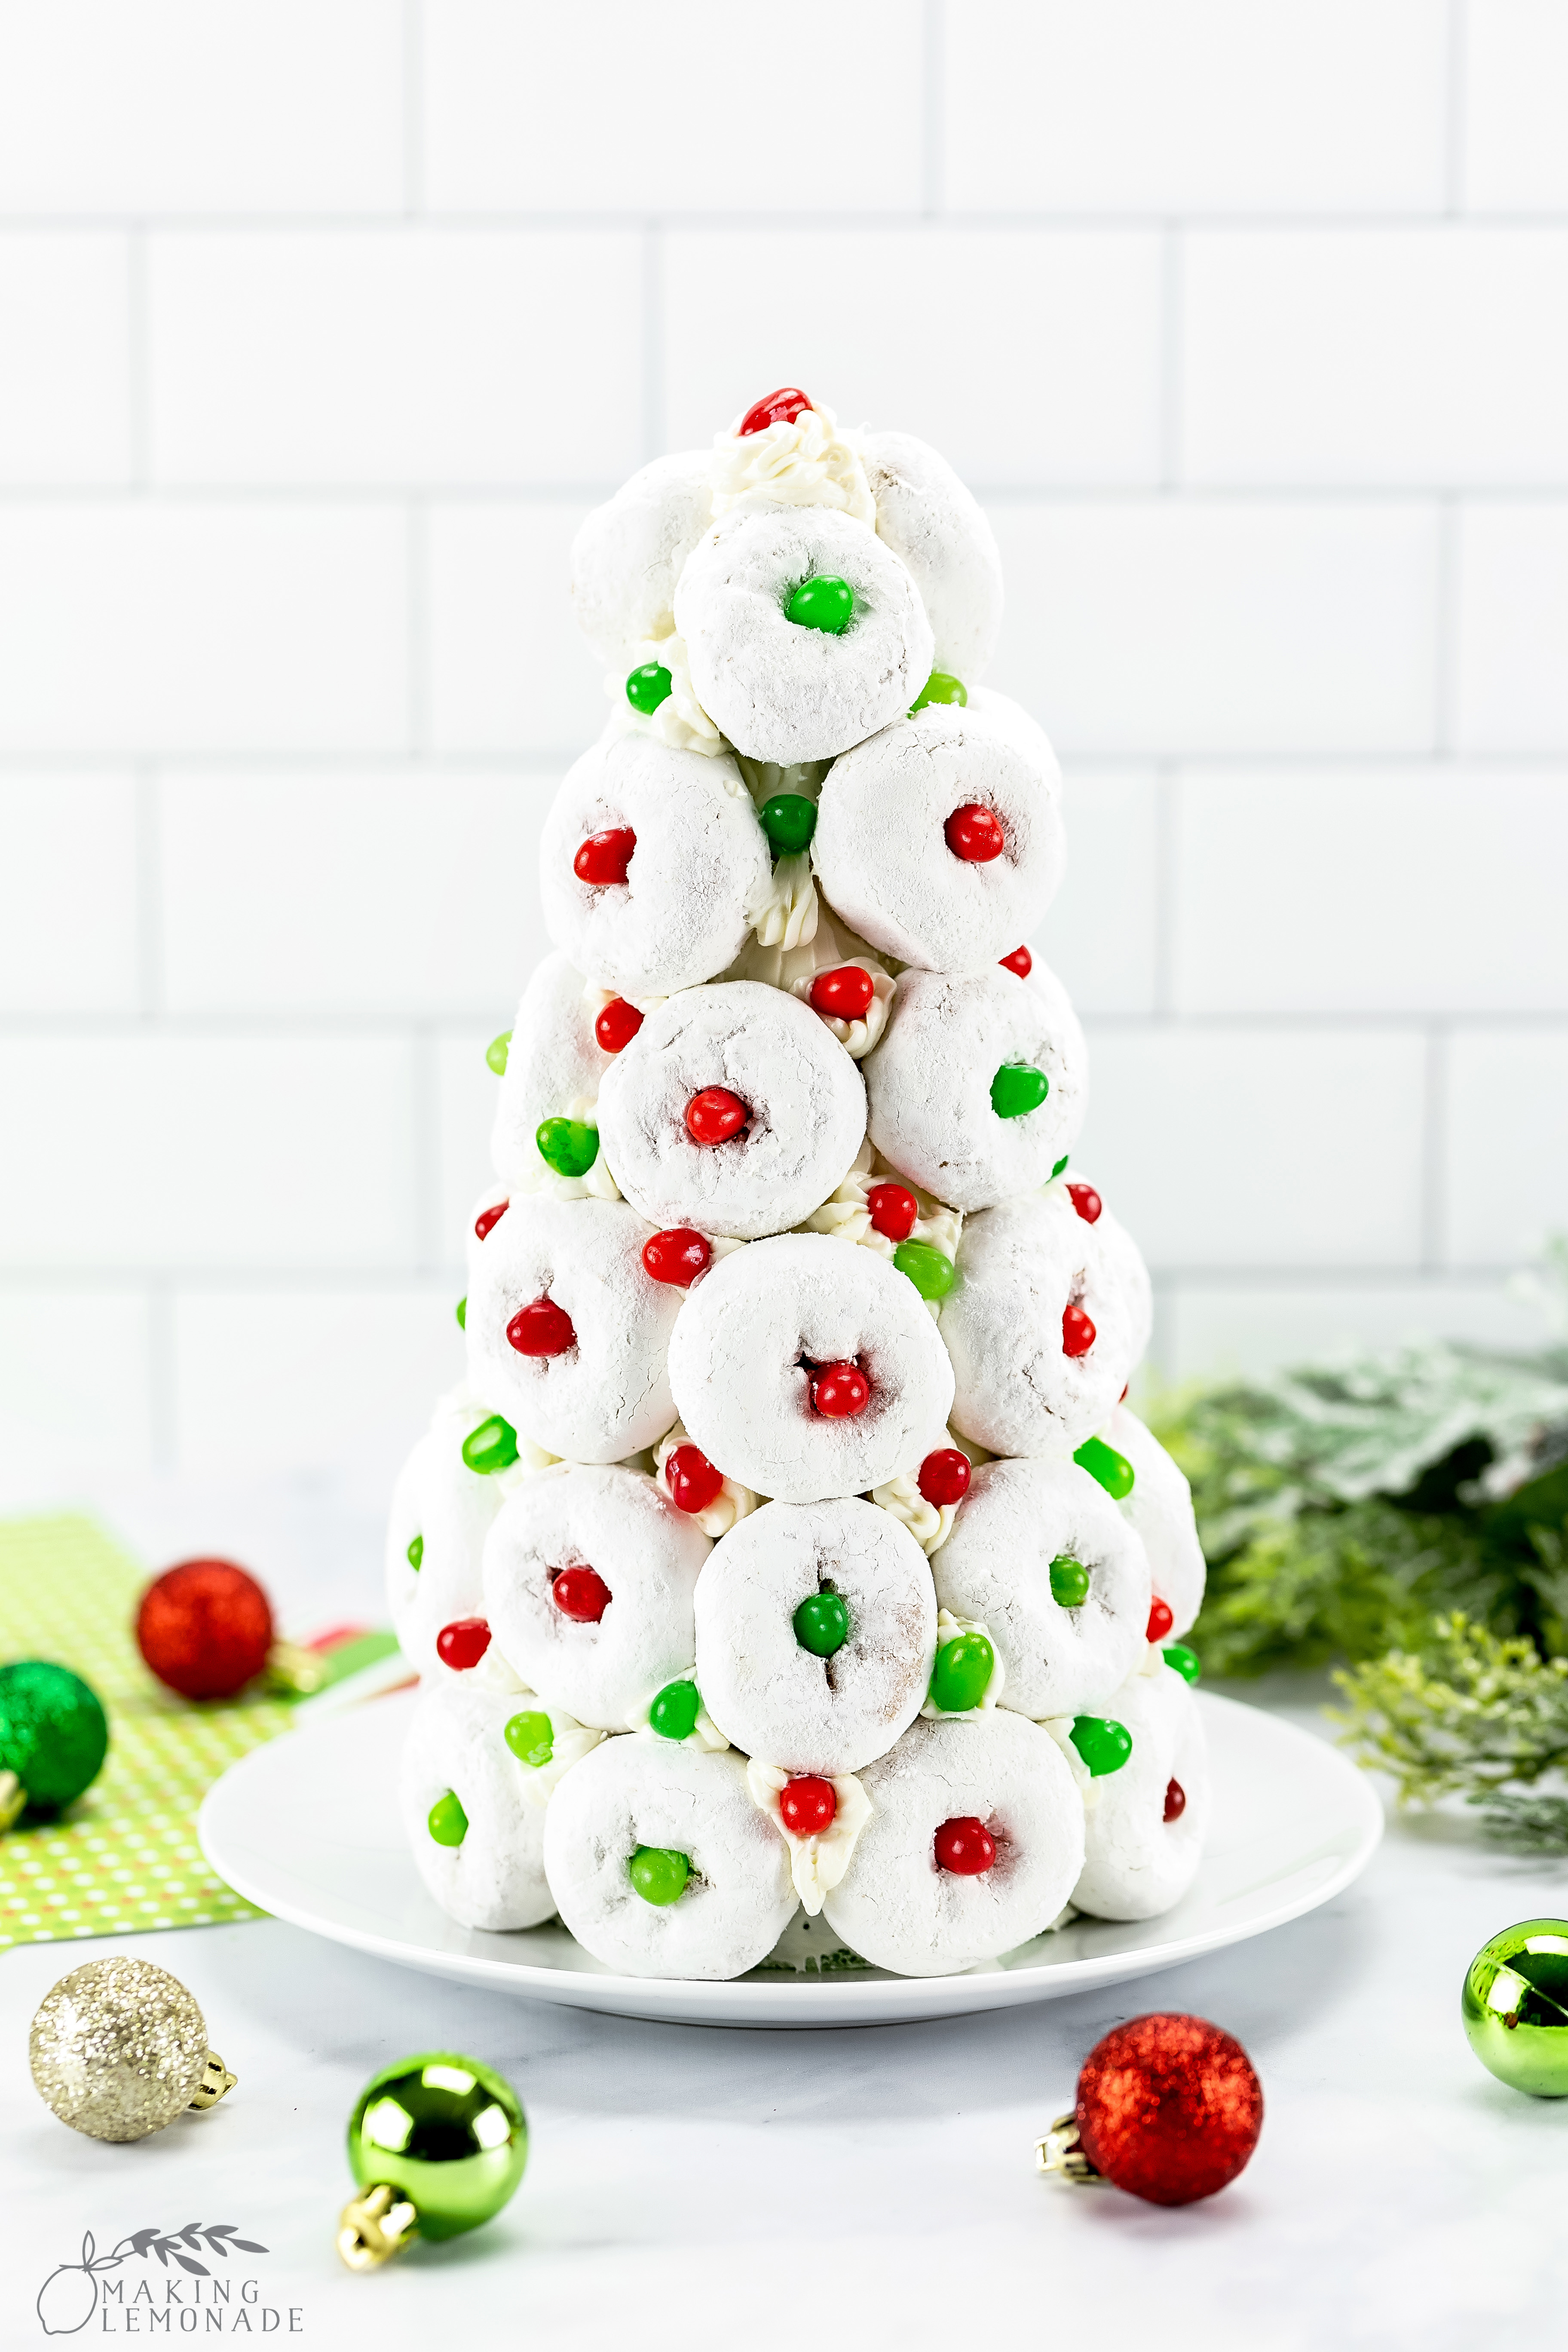 Your Christmas Party Guests Will LOVE This DIY Doughnut Tree